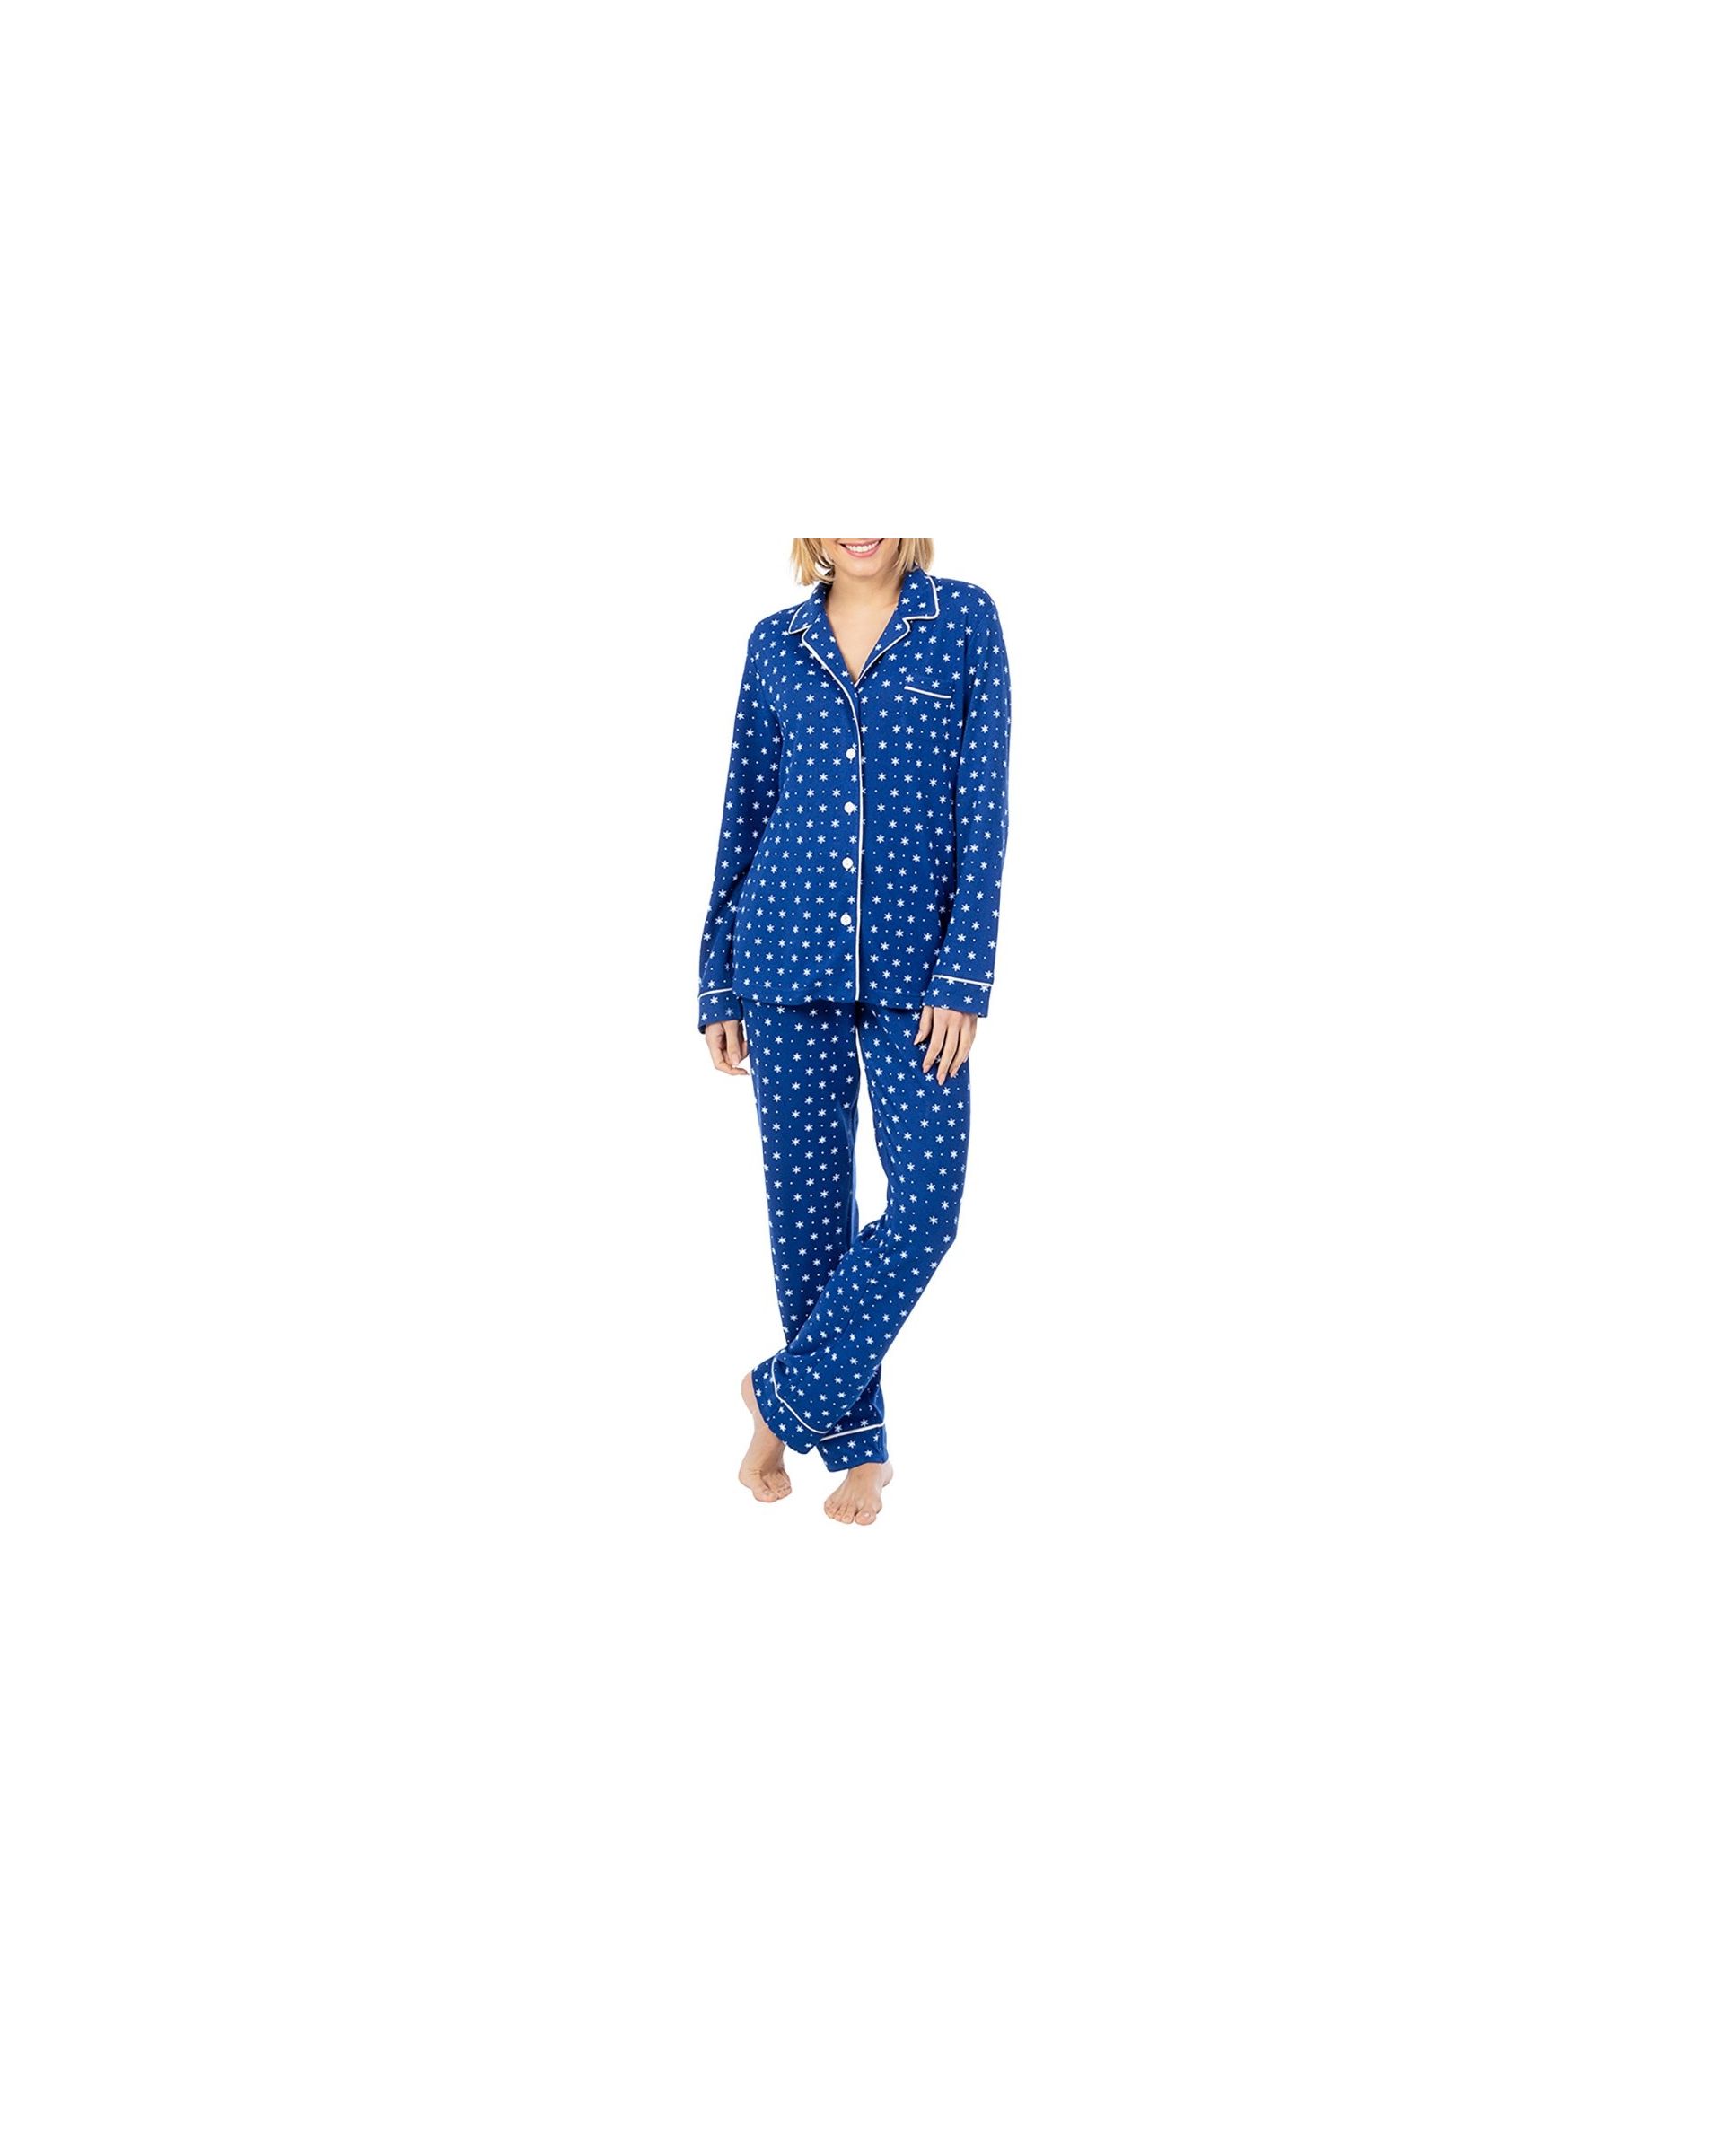 Lohe women's long pyjamas, consisting of long sleeve open jacket with buttons, star print, long trousers.